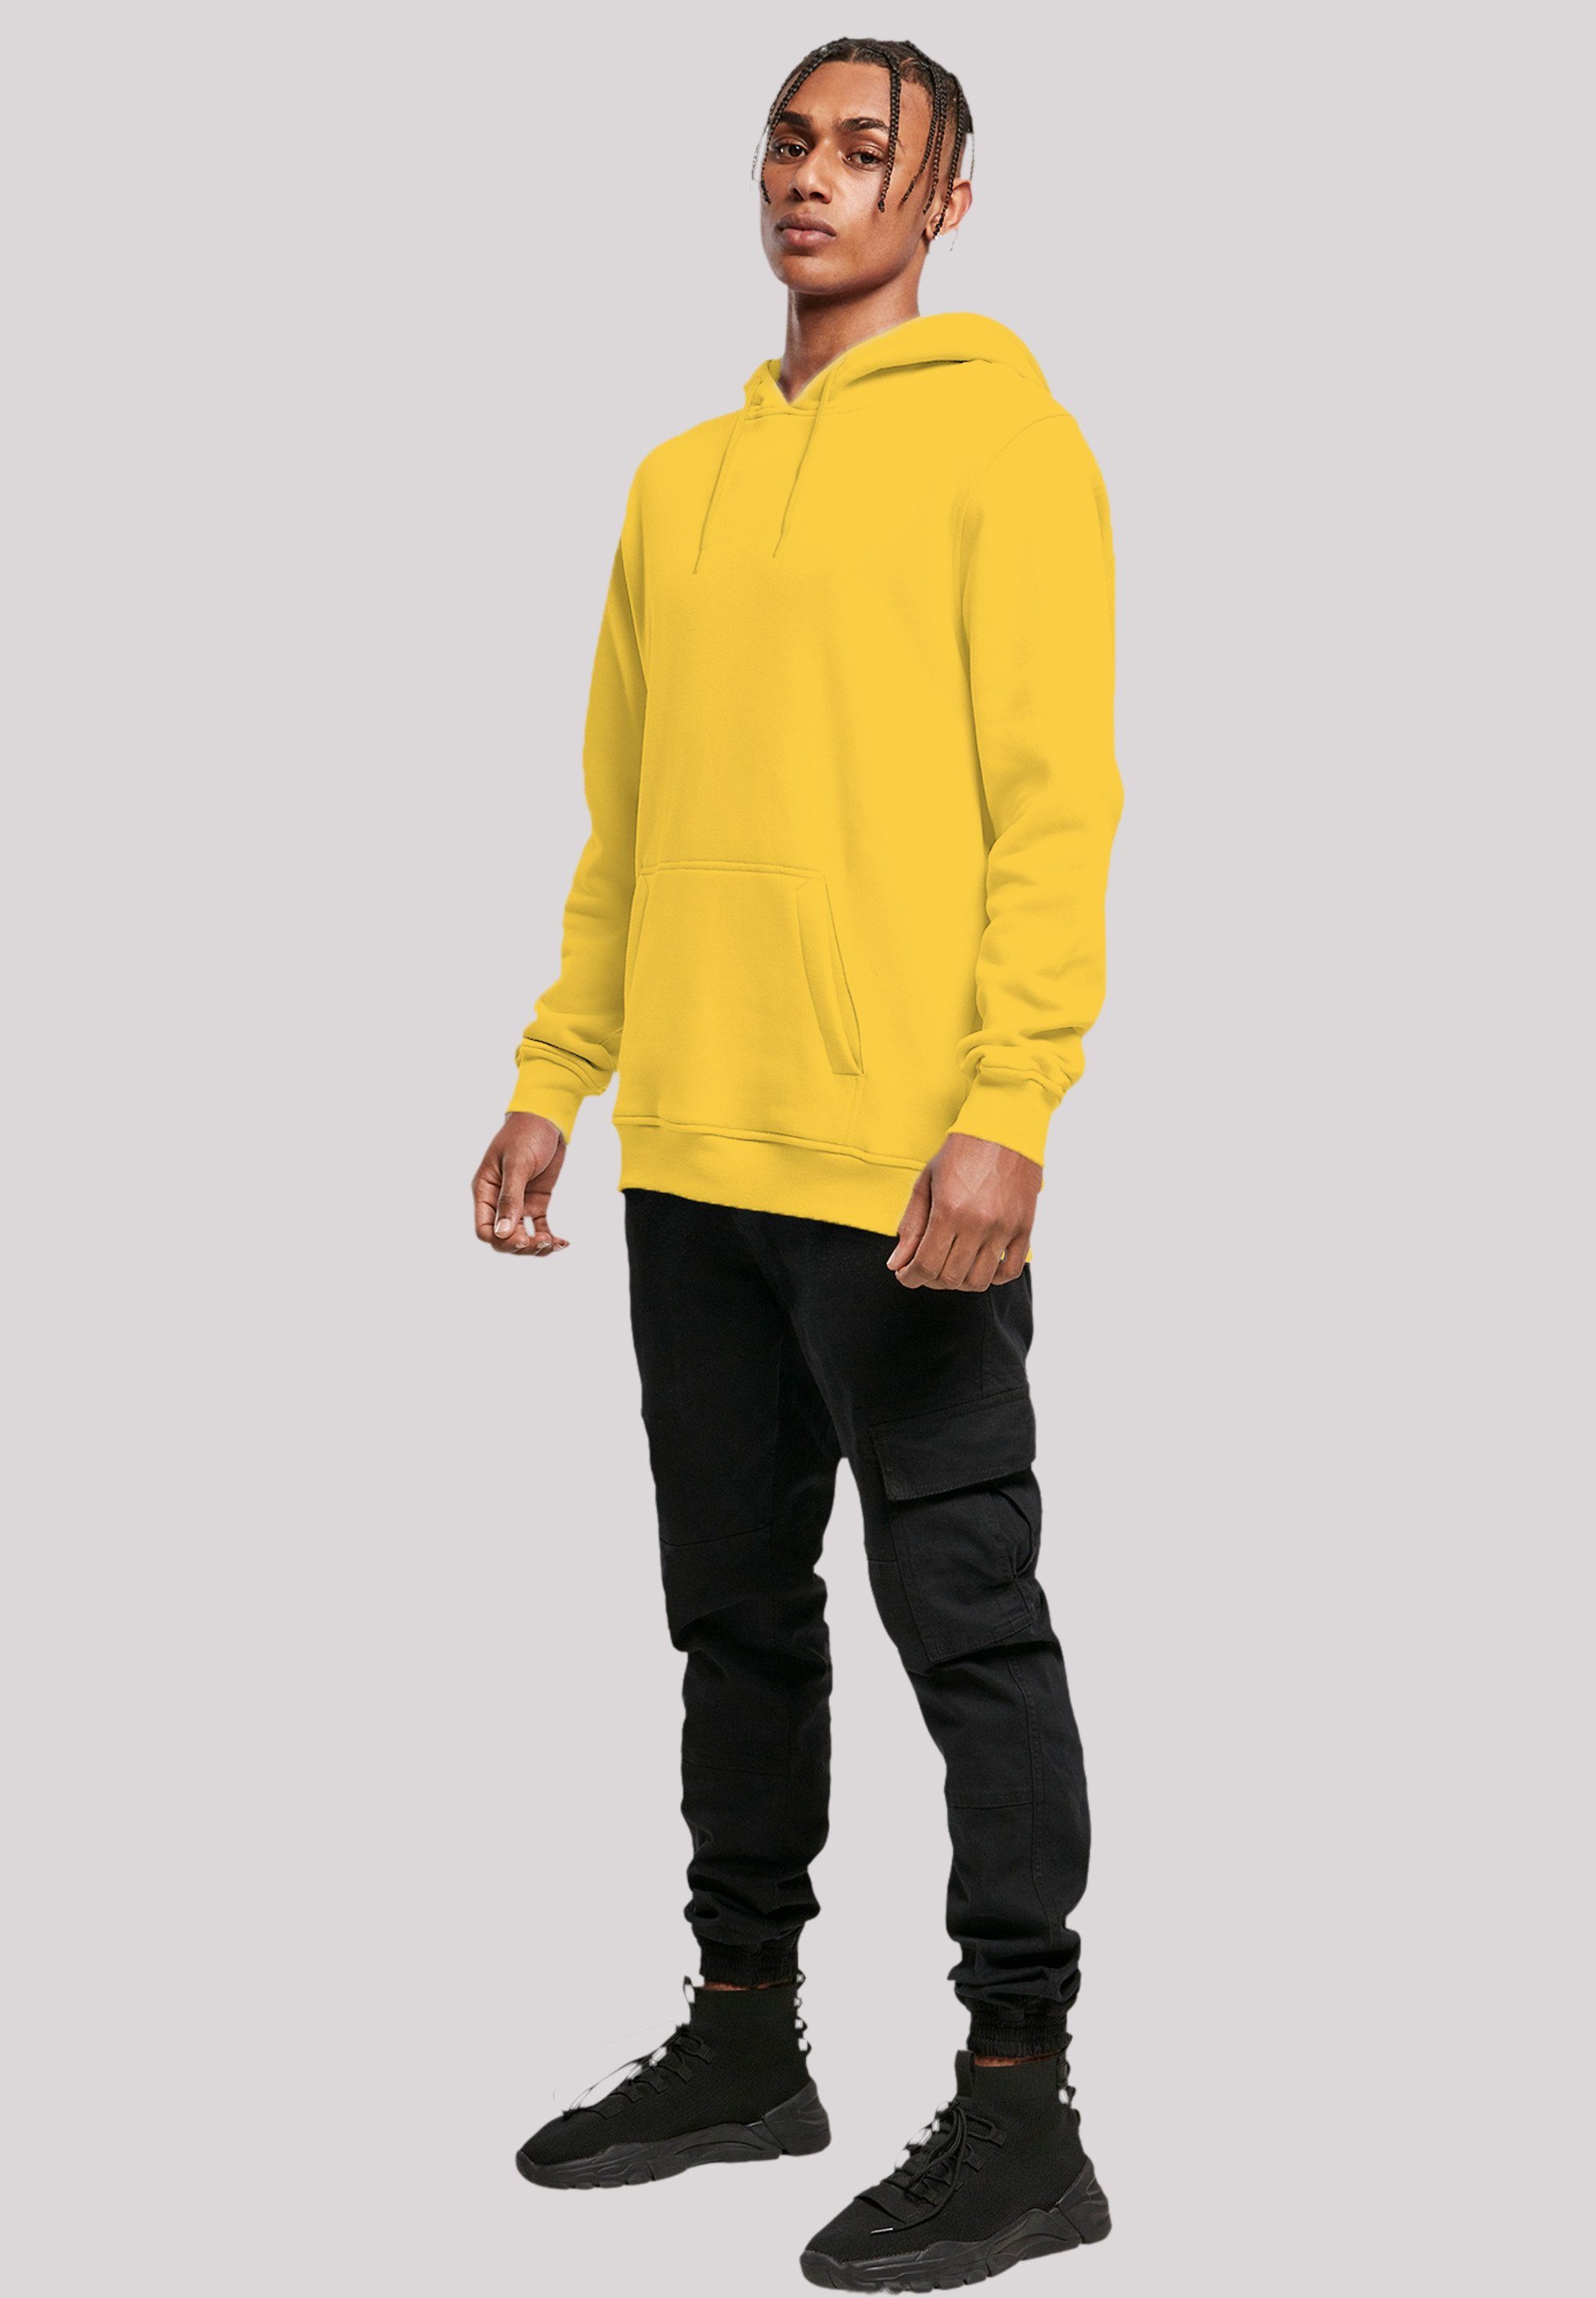 F4NT4STIC Hoodie The Doors Music yellow Band, Logo taxi Premium Band Band Qualität, Standing